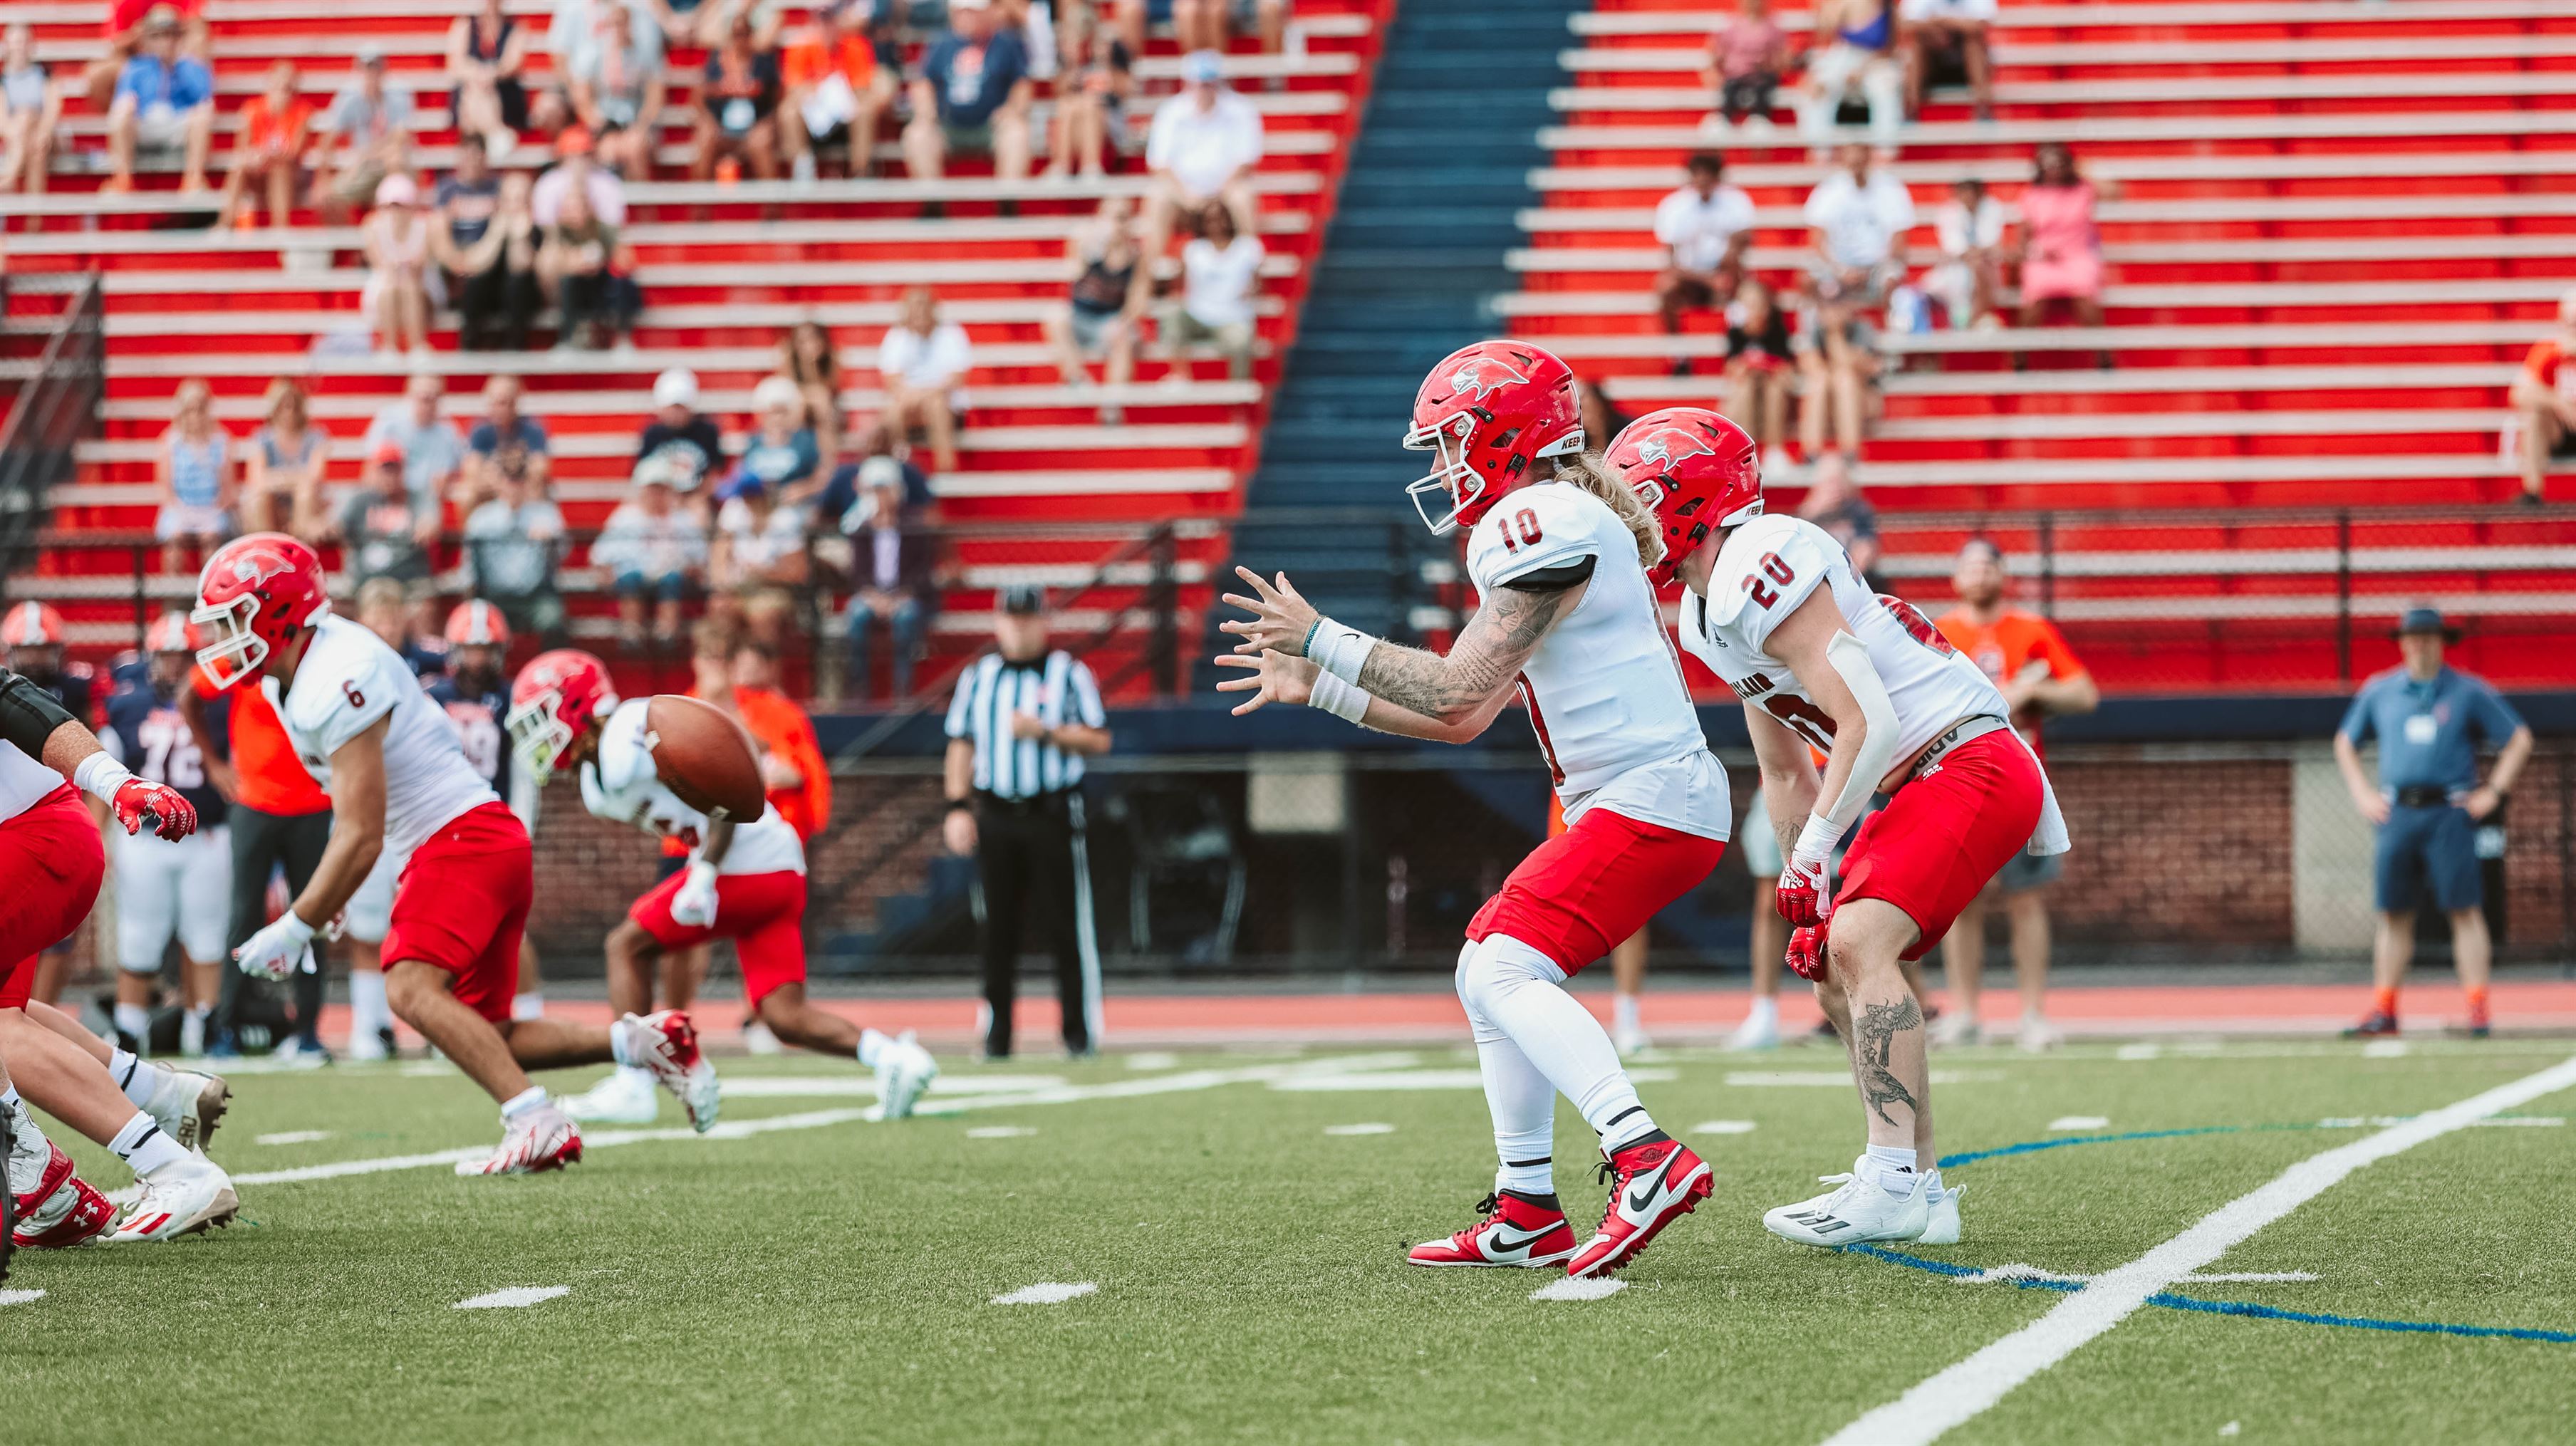 Sophomore quarterback Andrew Sanborn leading the charge offensively for the Red Hawks. Photo courtesy of Matt Deluca